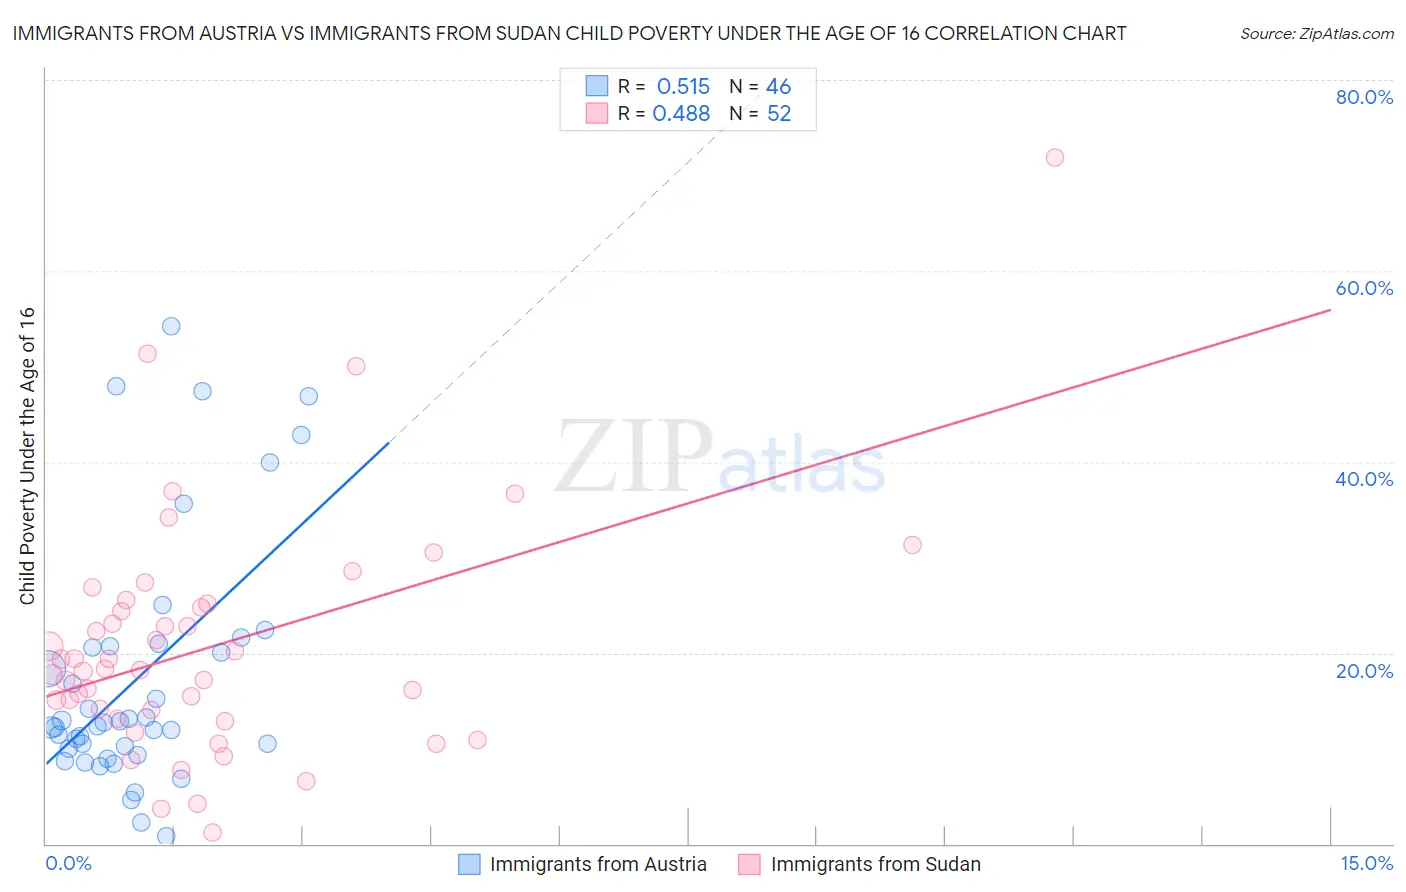 Immigrants from Austria vs Immigrants from Sudan Child Poverty Under the Age of 16